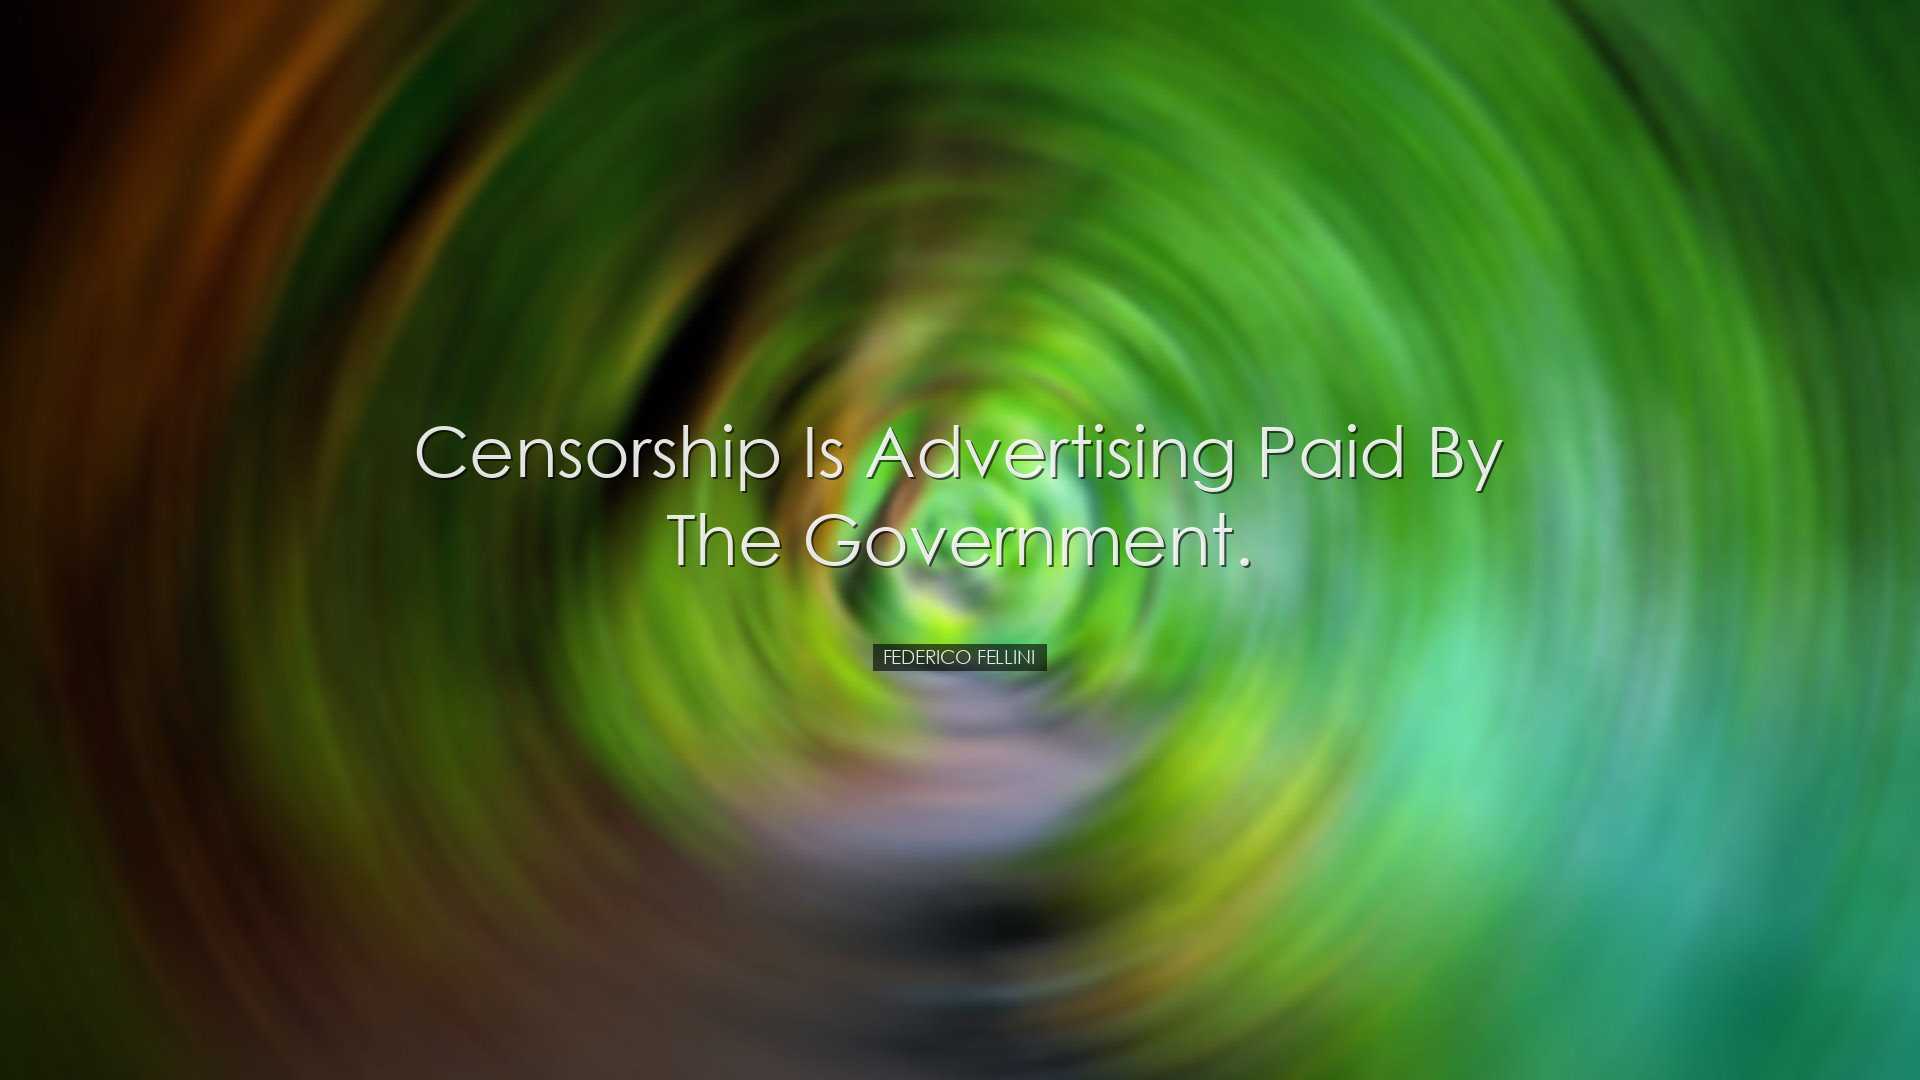 Censorship is advertising paid by the government. - Federico Felli